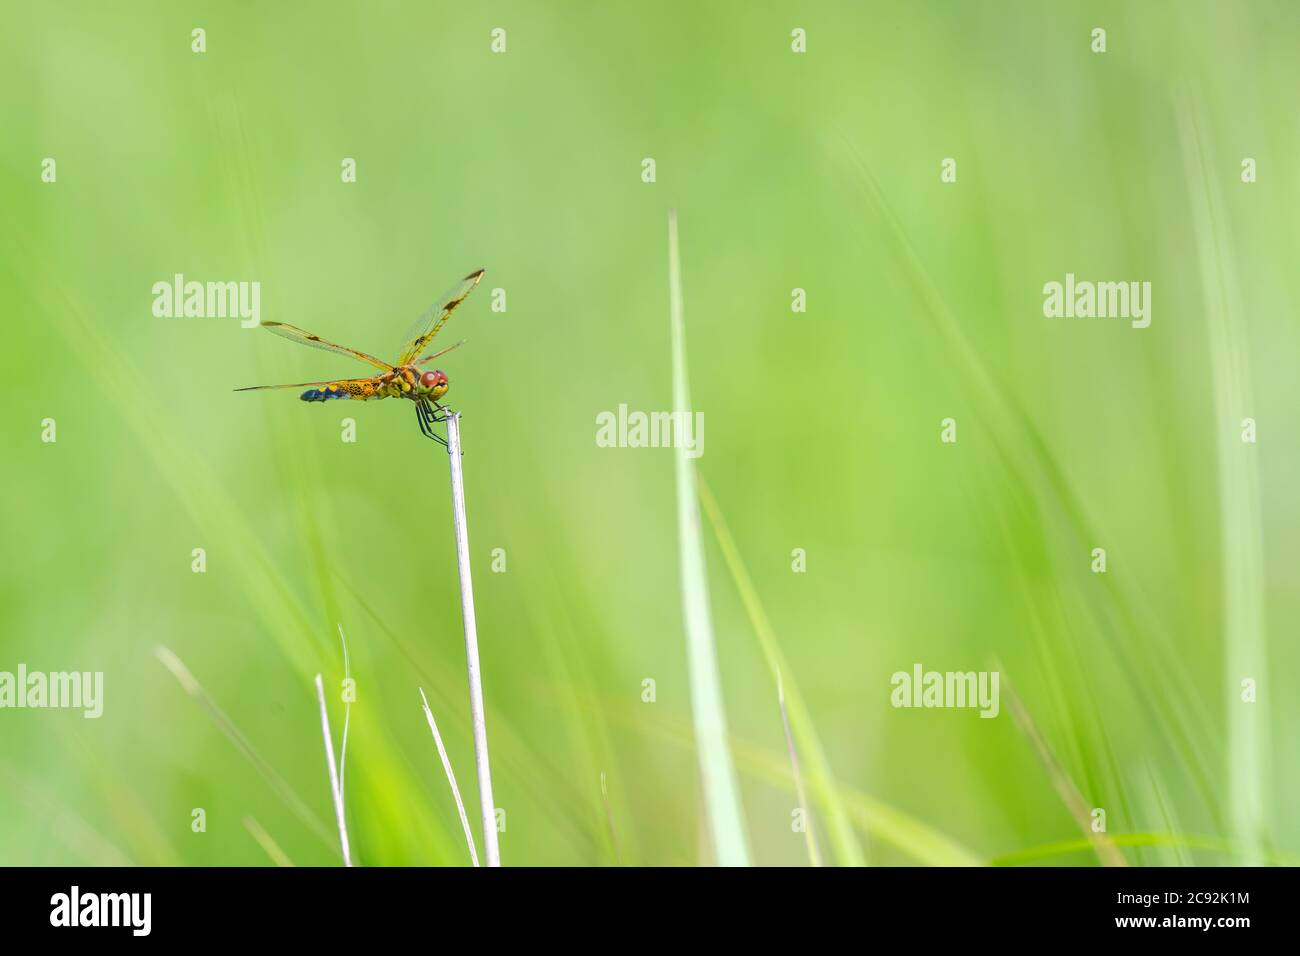 A Calico Pennant (Celithemis elisa) Dragonfly resting on vegetation against a green background. Stock Photo